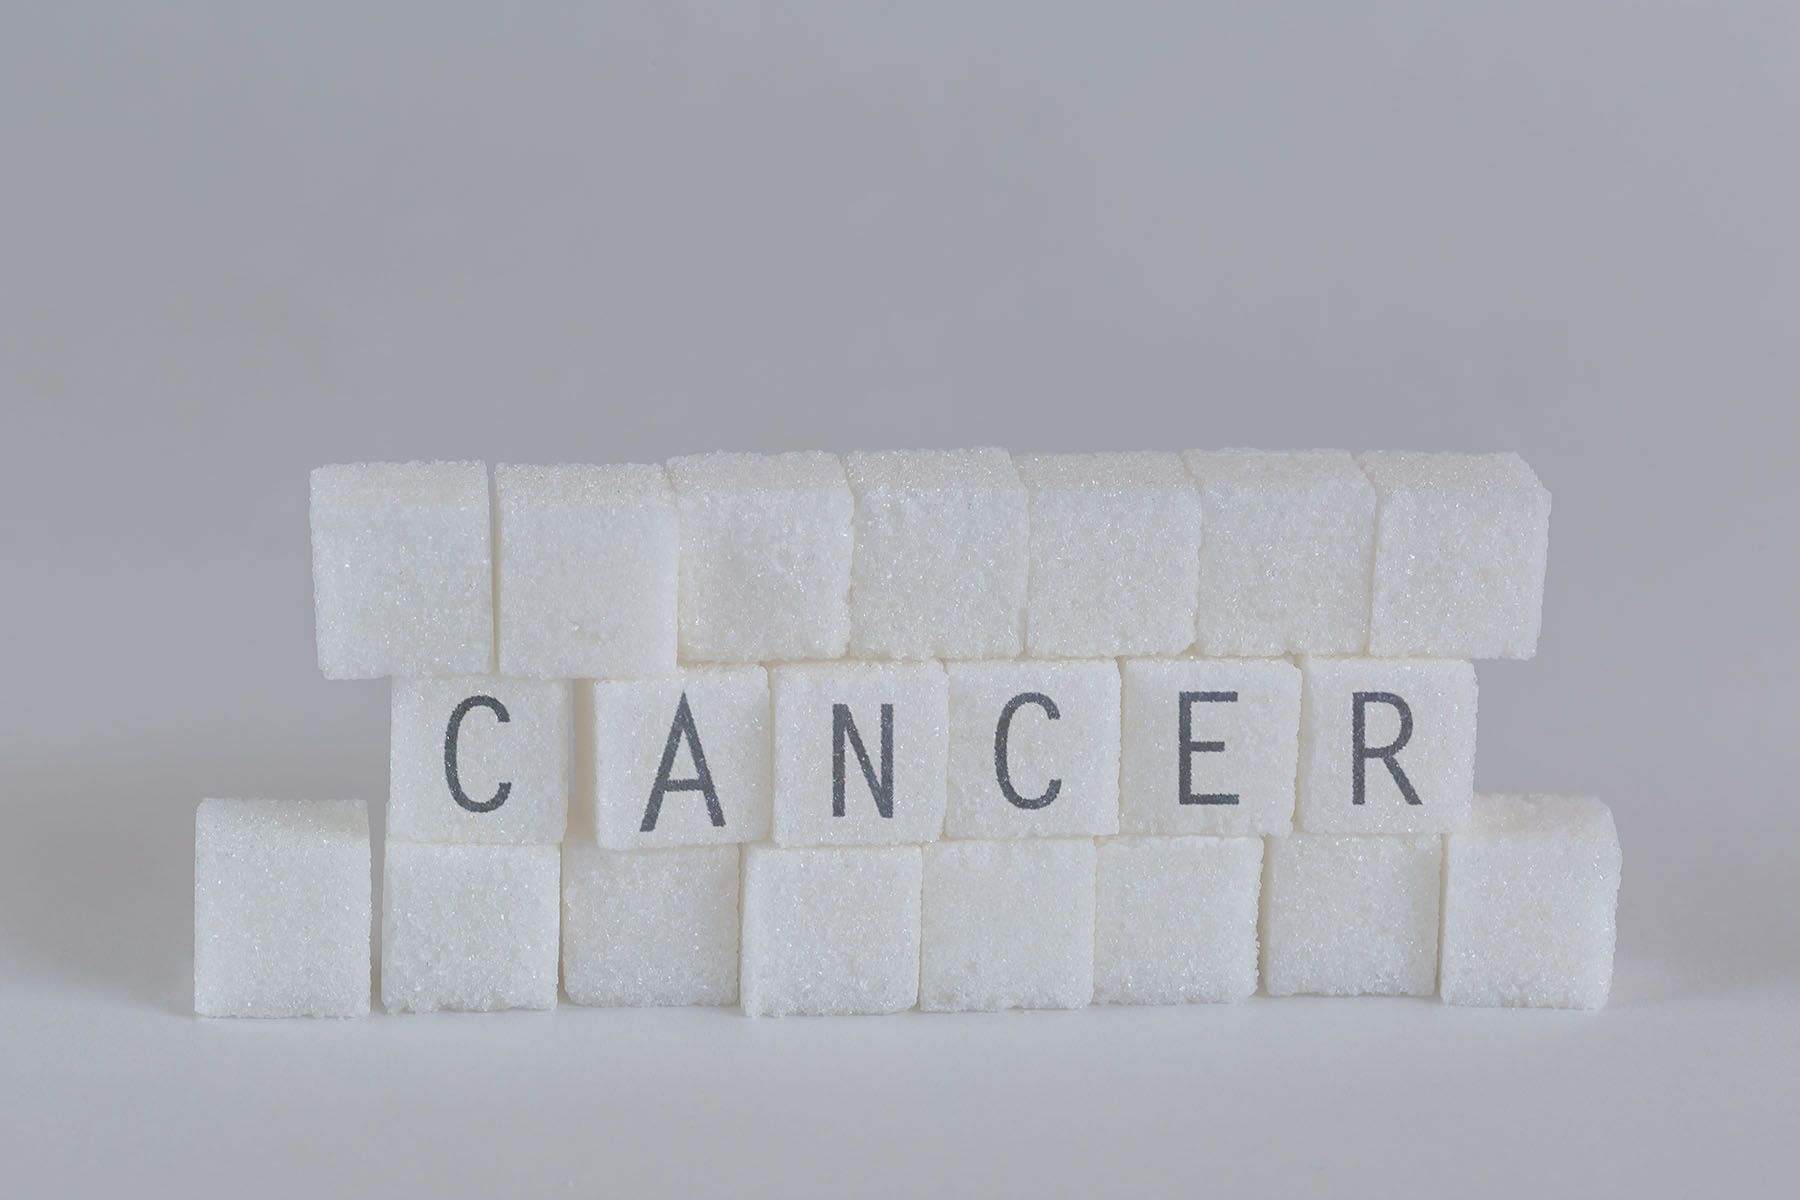 Image of stacked sugar cubes with cancer written on them.